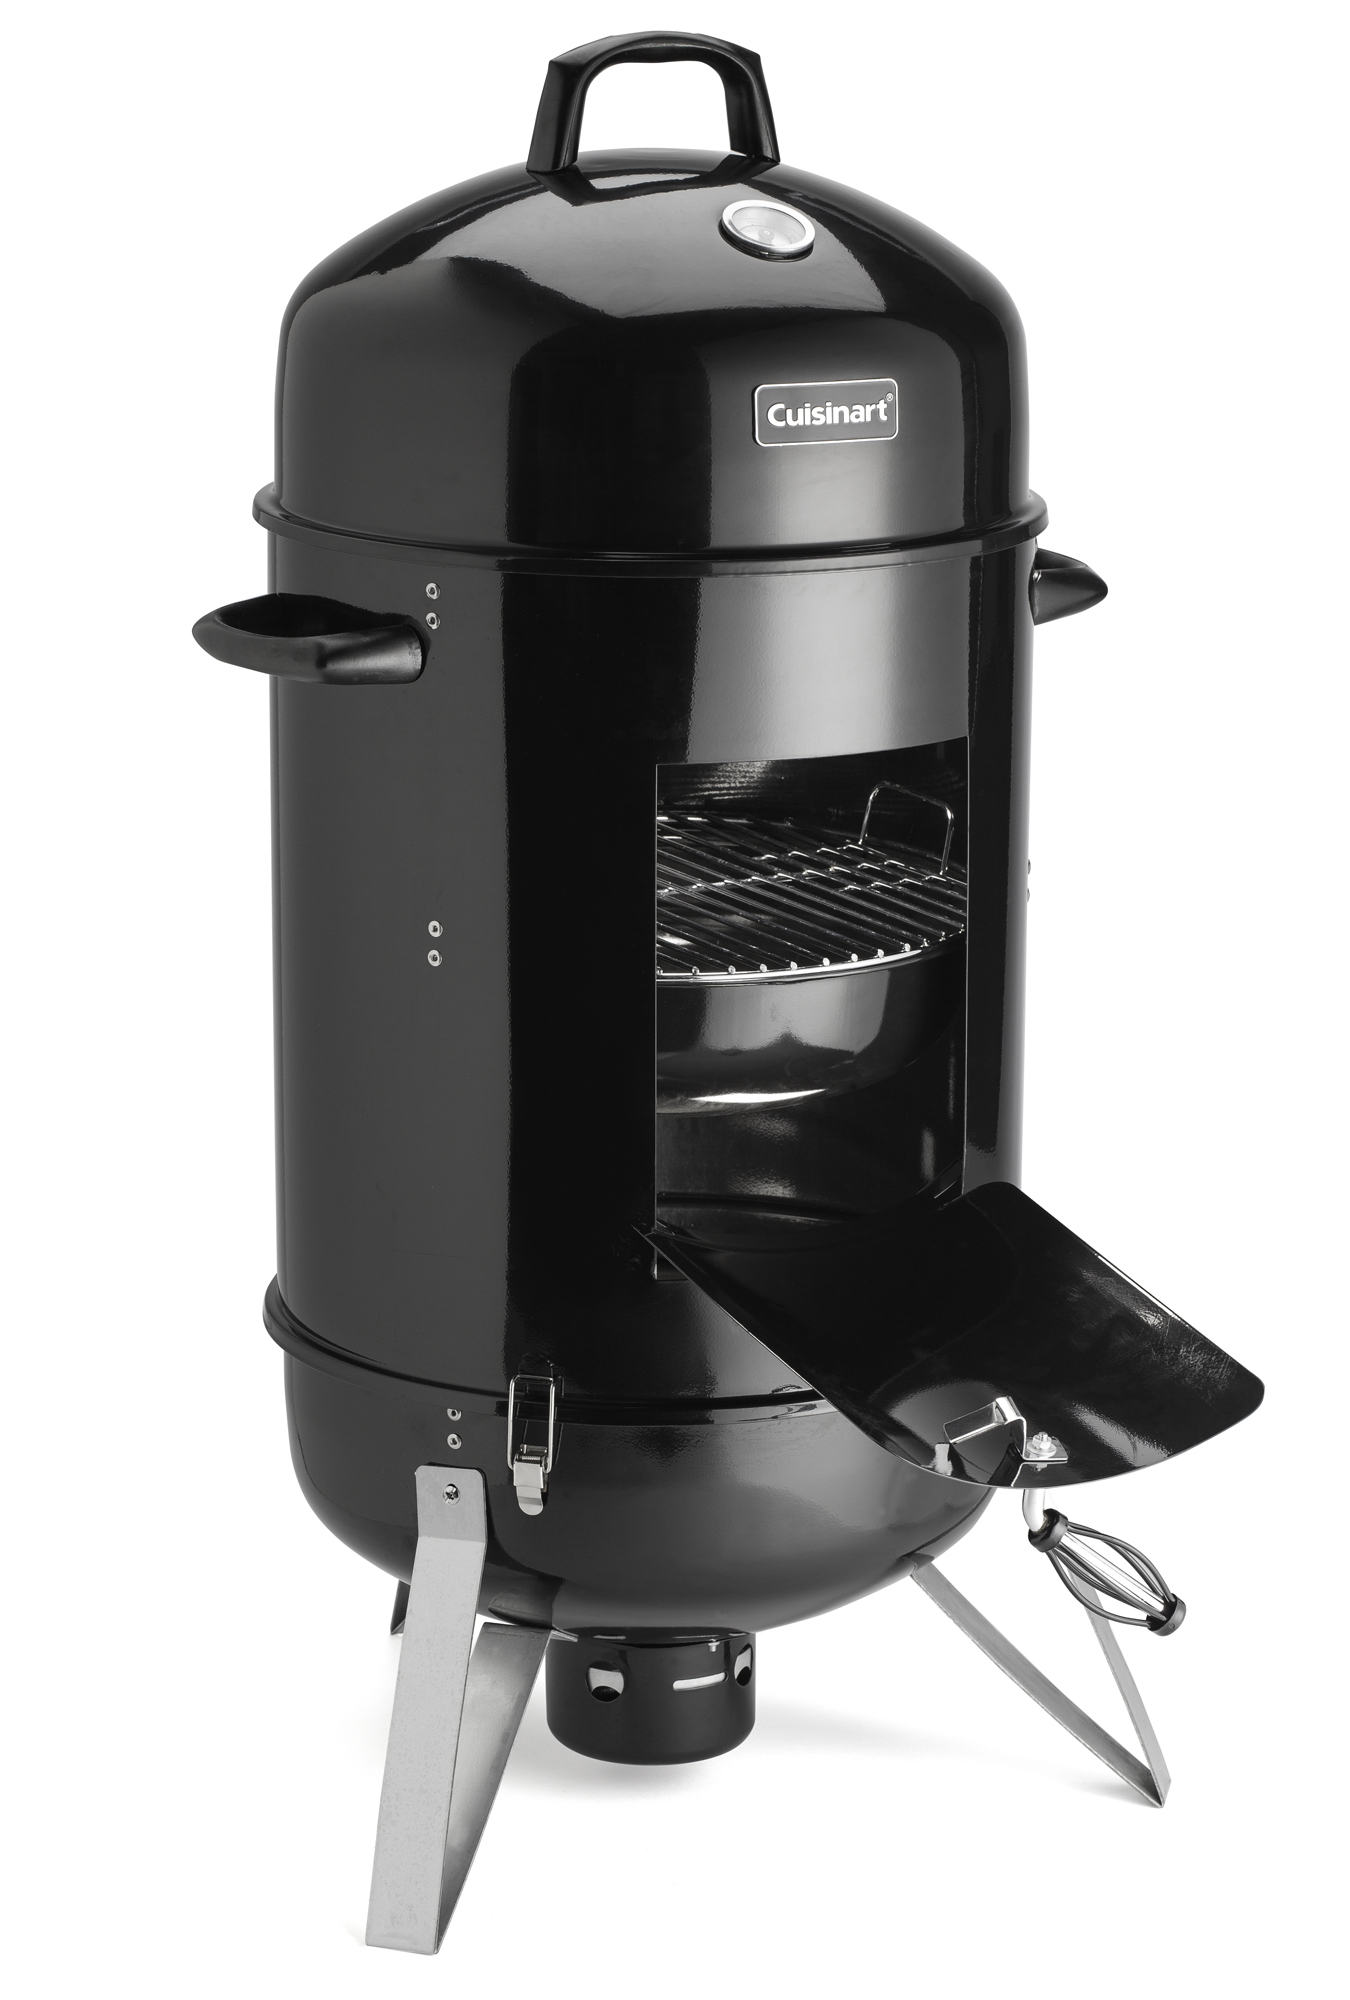 Cuisinart COS-118 Vertical 18 Inch Charcoal Smoker Grill with Dual Vents, Black - image 3 of 7